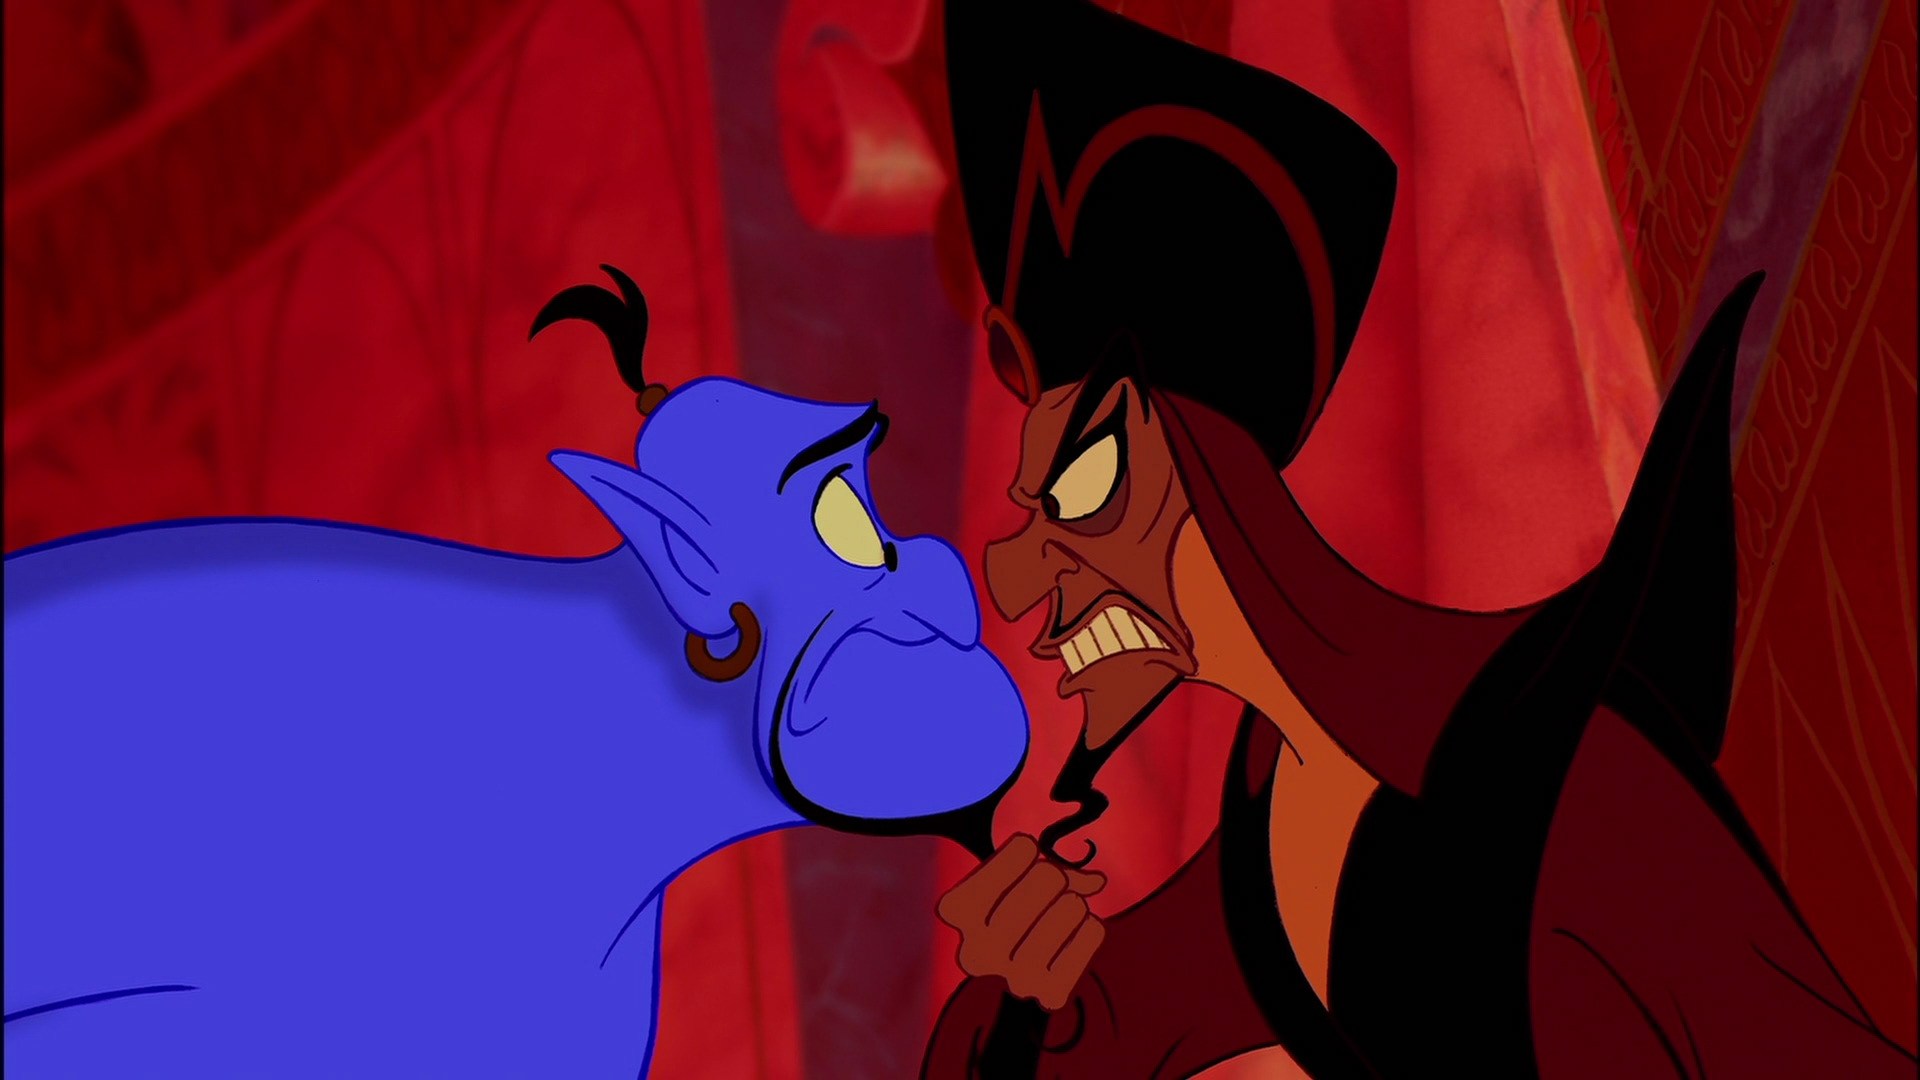 Disney's Aladdin Subconsciously Dictated the Type Of Men I Date